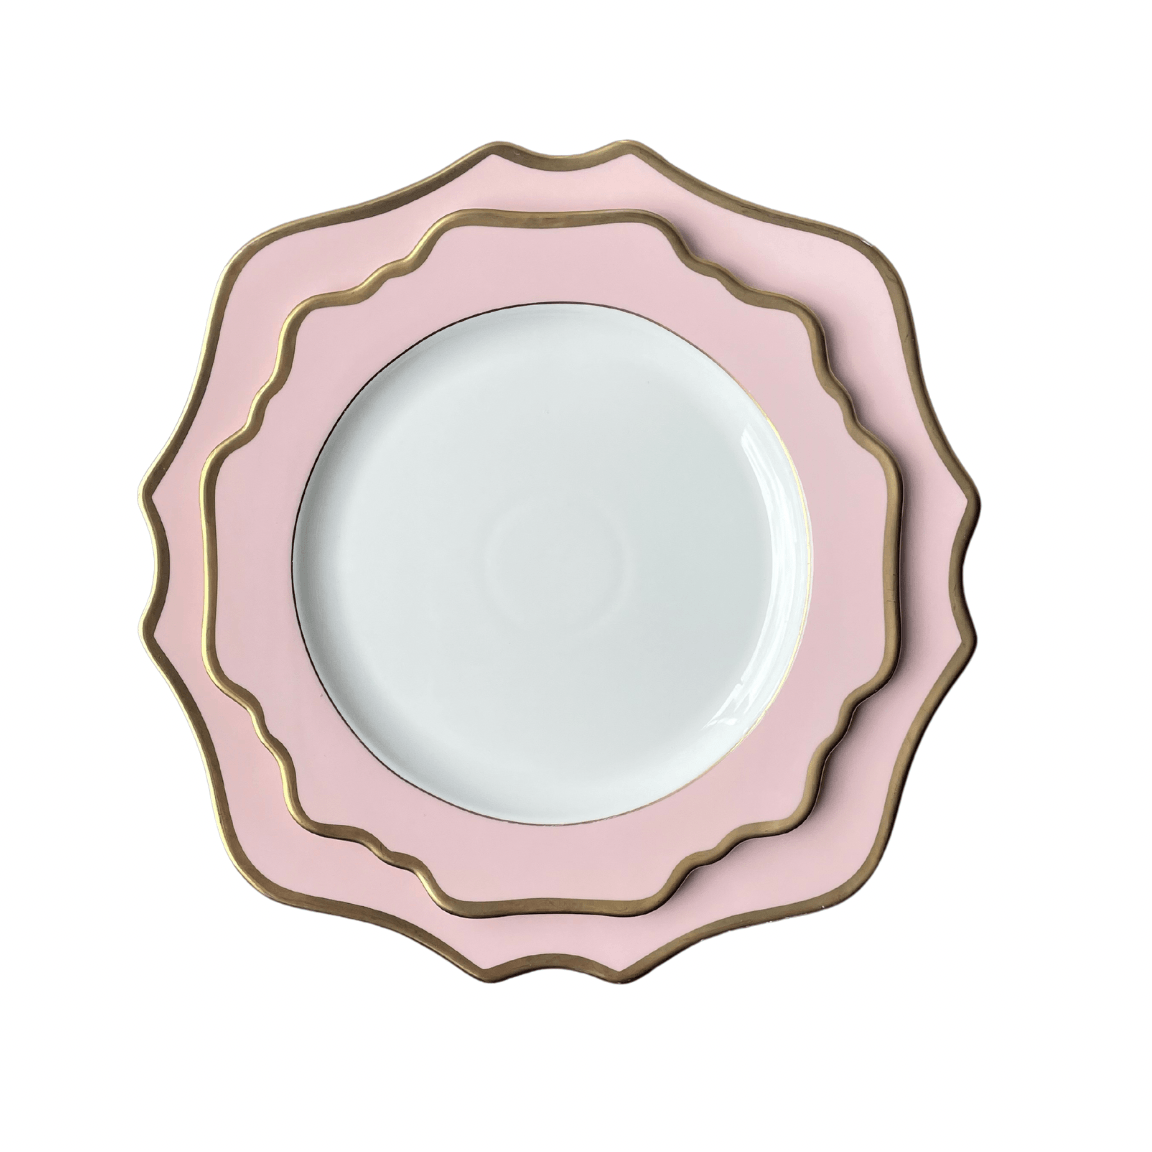 Ornate Pink and Gold Dinnerware Hire